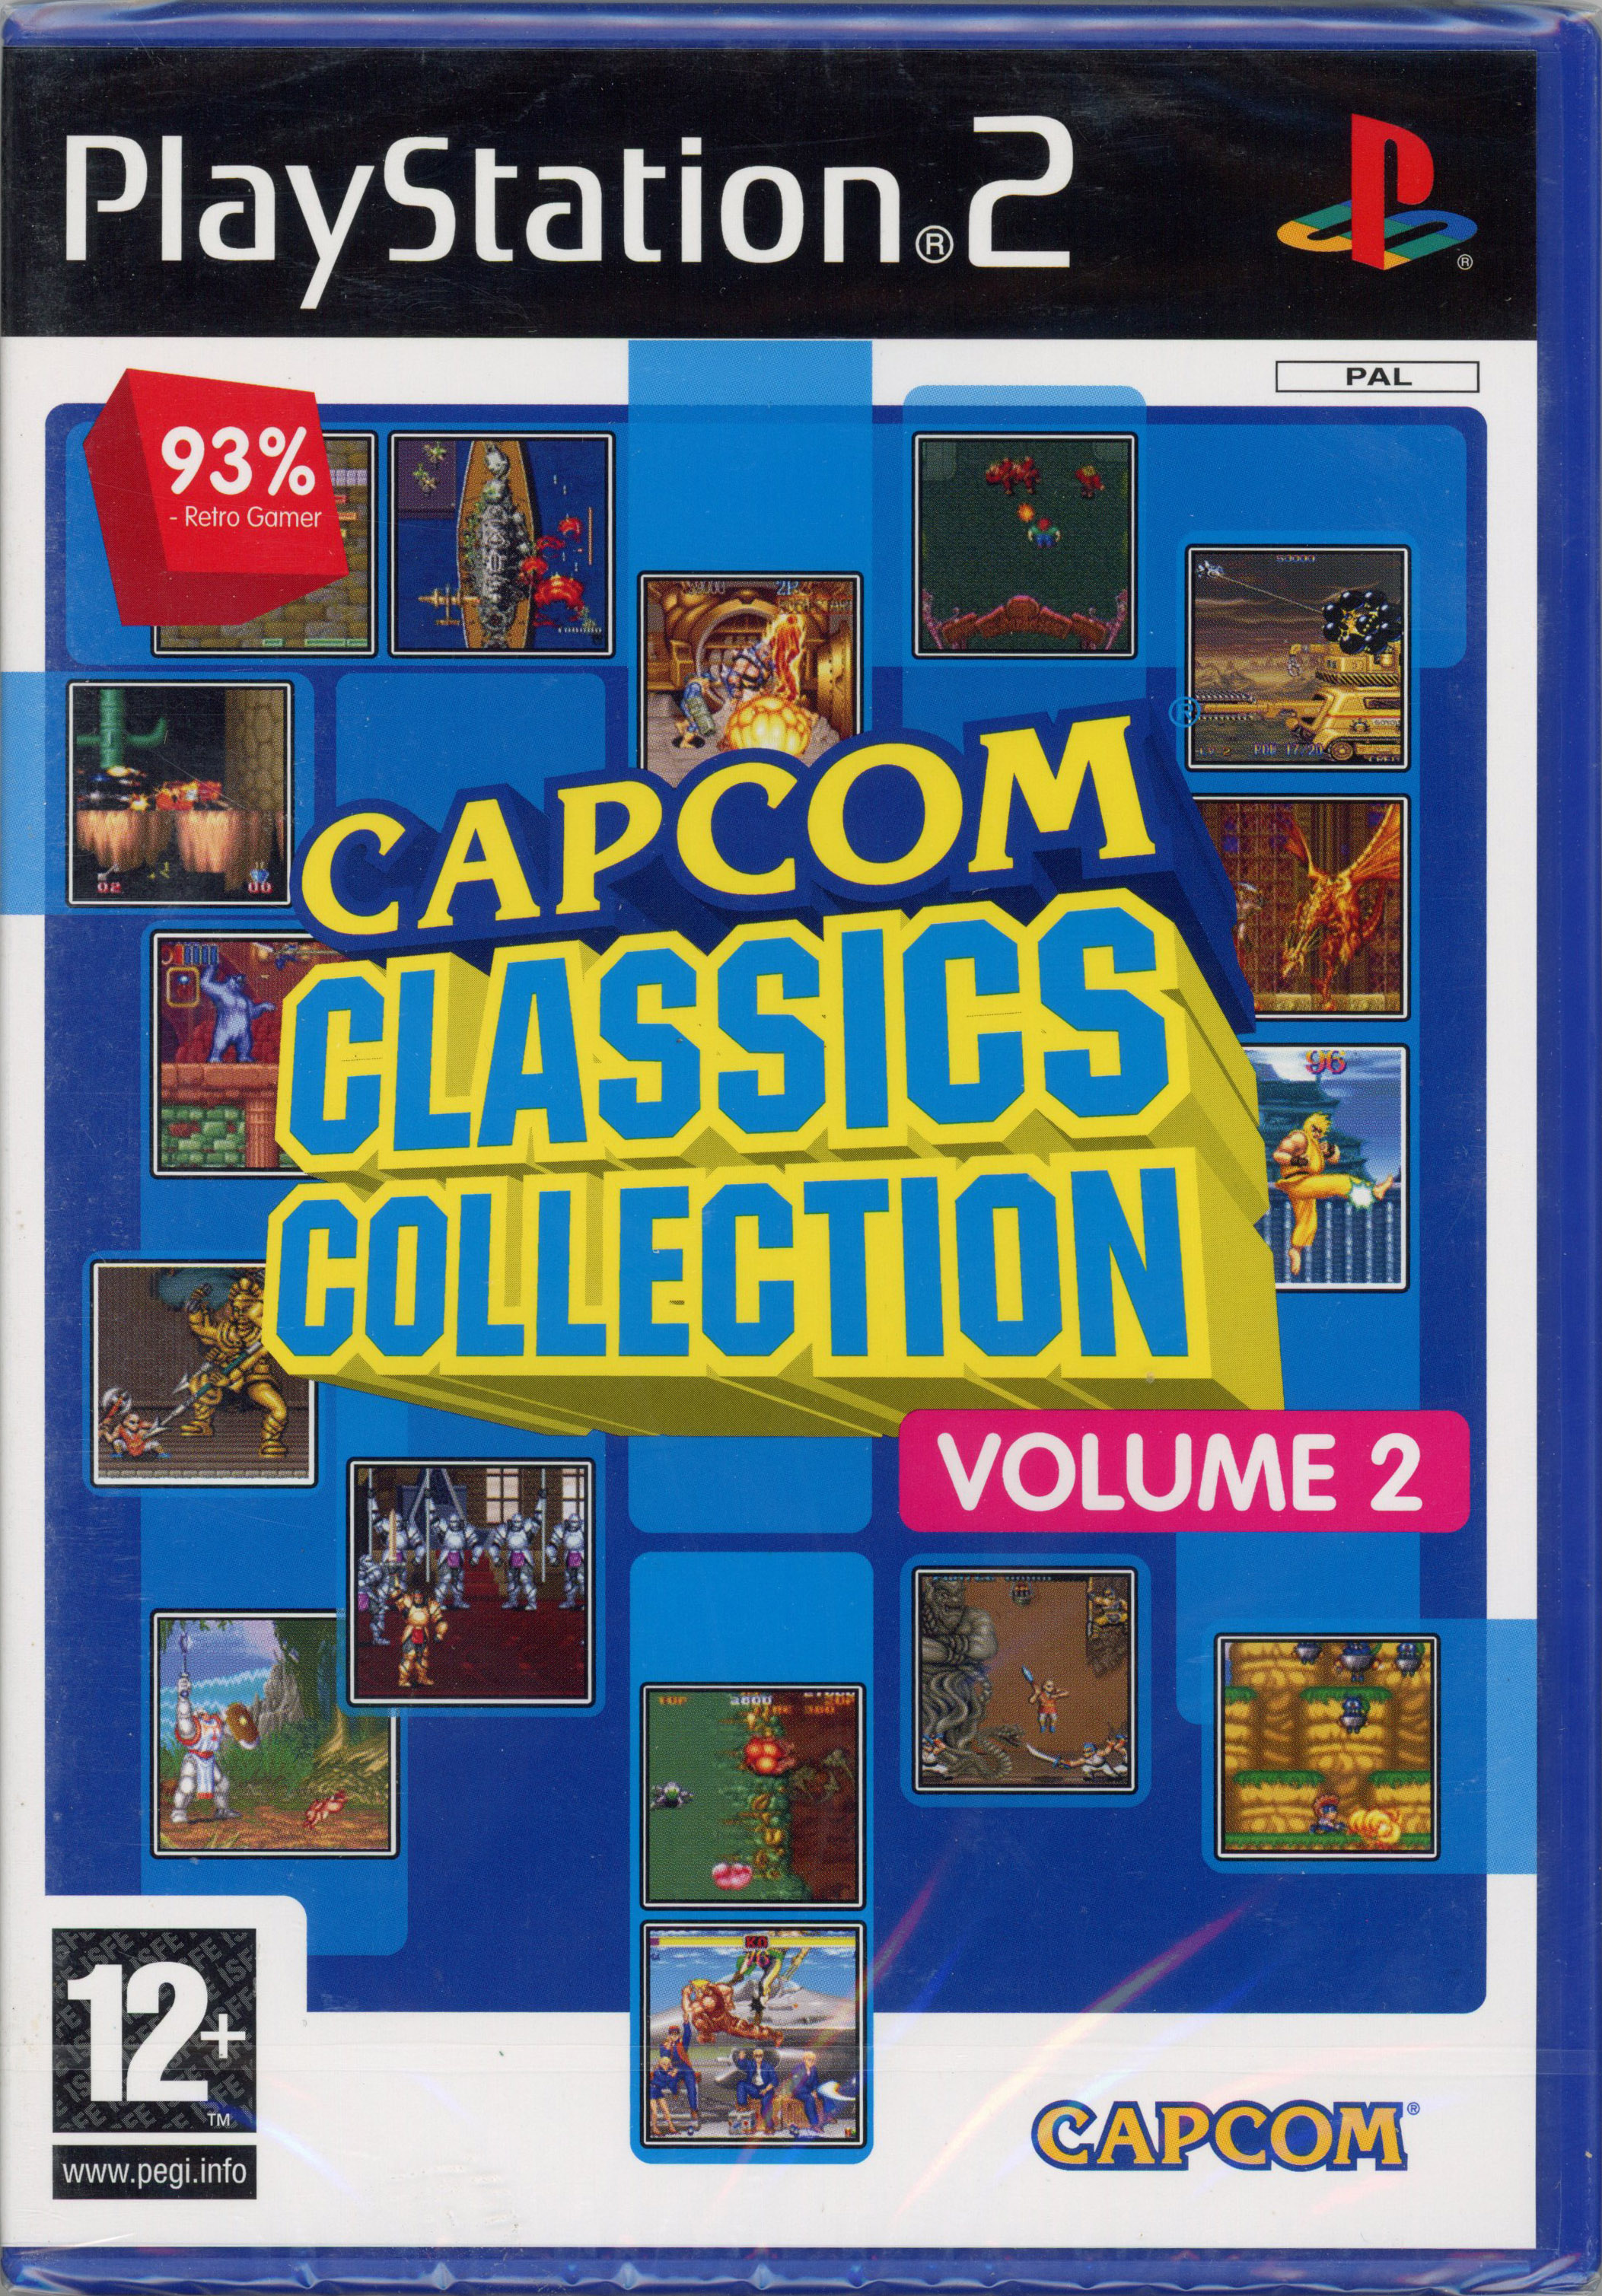 Sony - Capcom Classics Collection Vol. 2 - PlayStation 2 - Factory Sealed